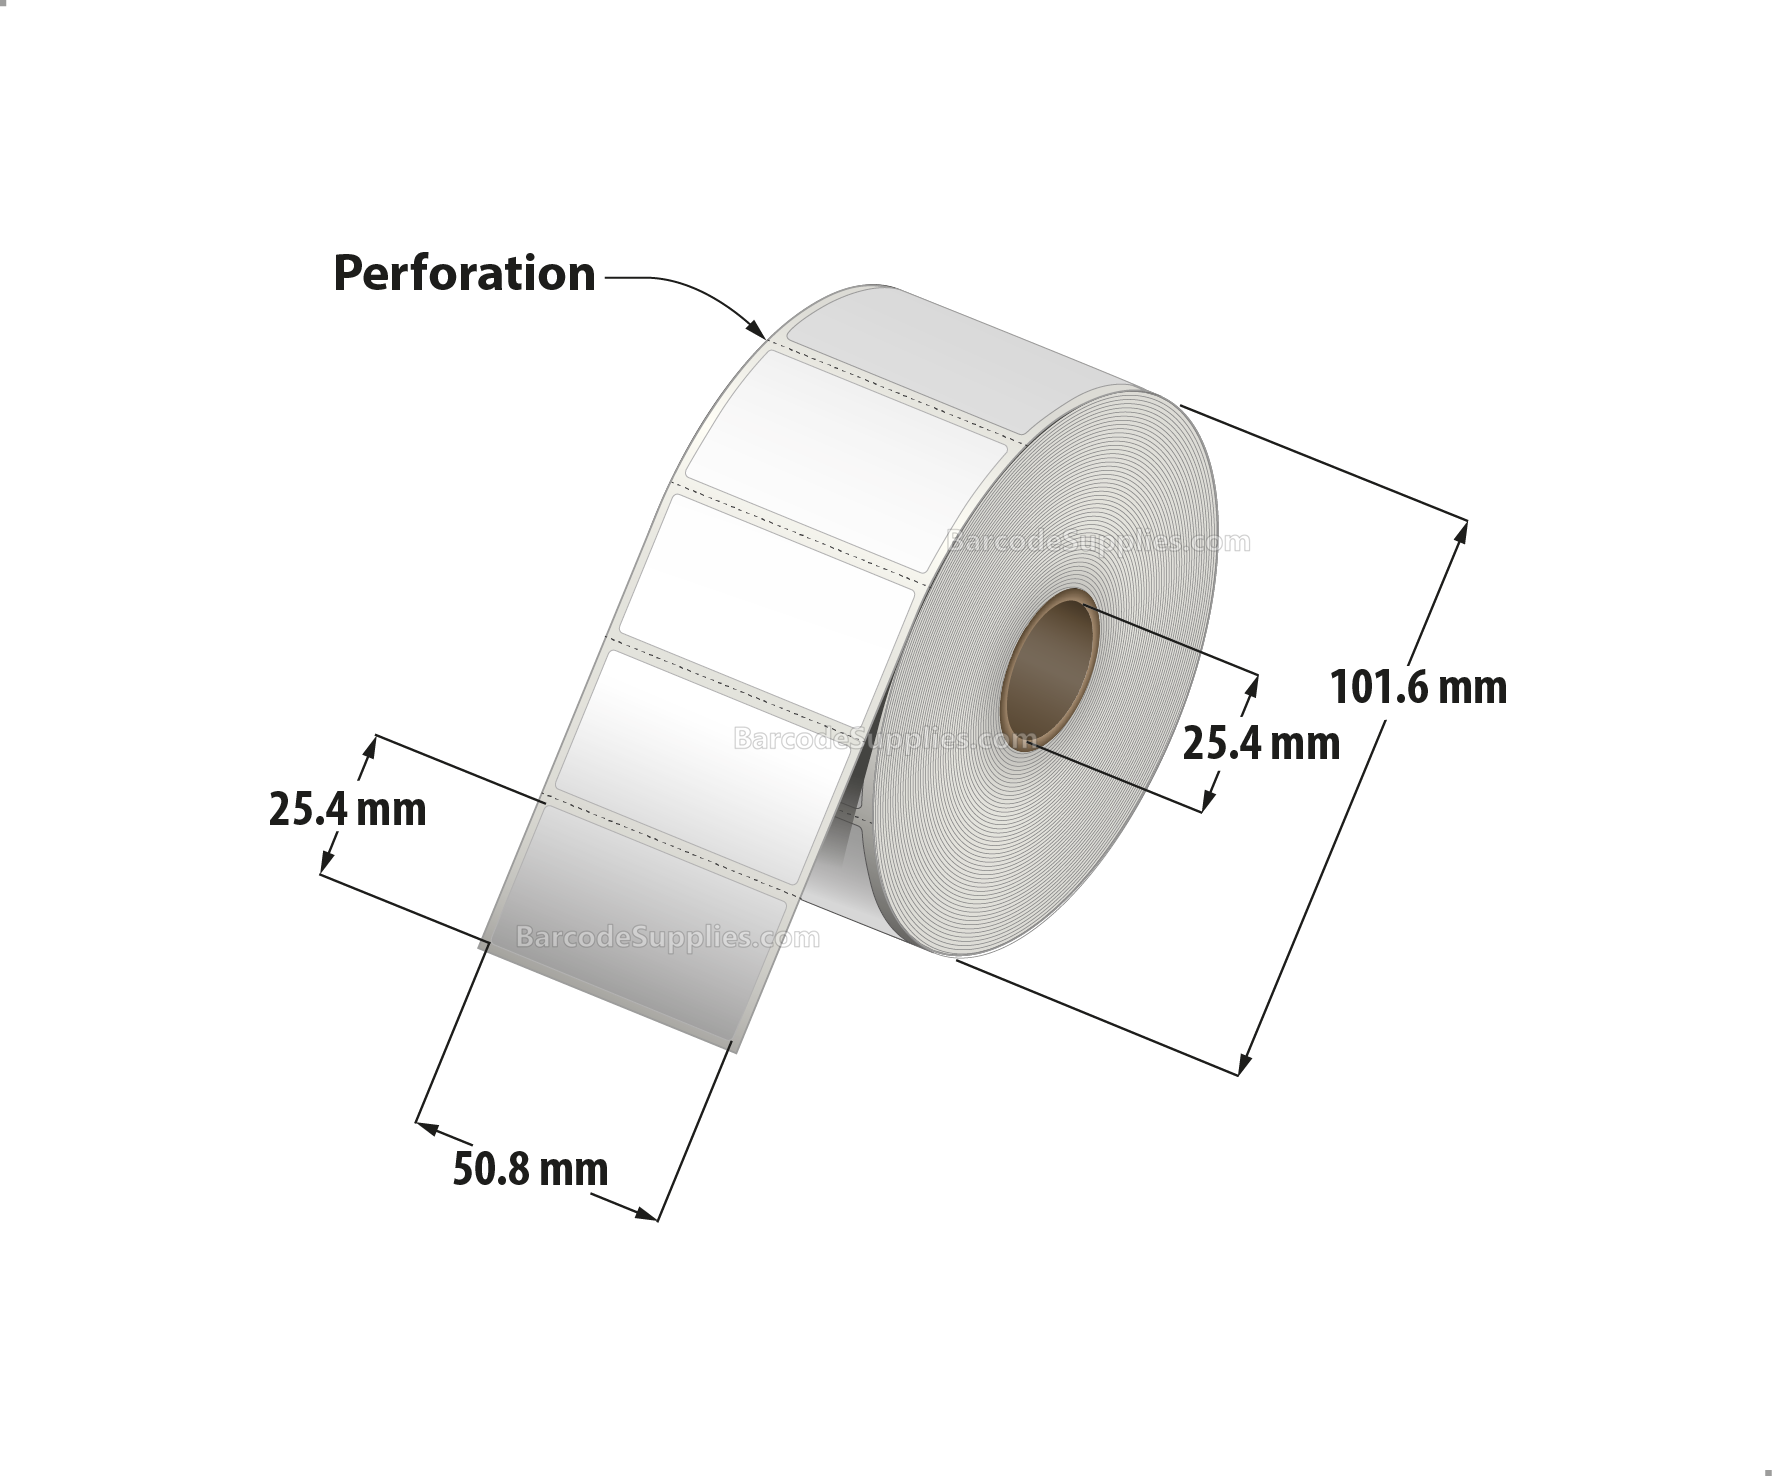 2 x 1 Thermal Transfer White Labels With Permanent Acrylic Adhesive - Perforated - 1400 Labels Per Roll - Carton Of 4 Rolls - 5600 Labels Total - MPN: TH21-14PTT